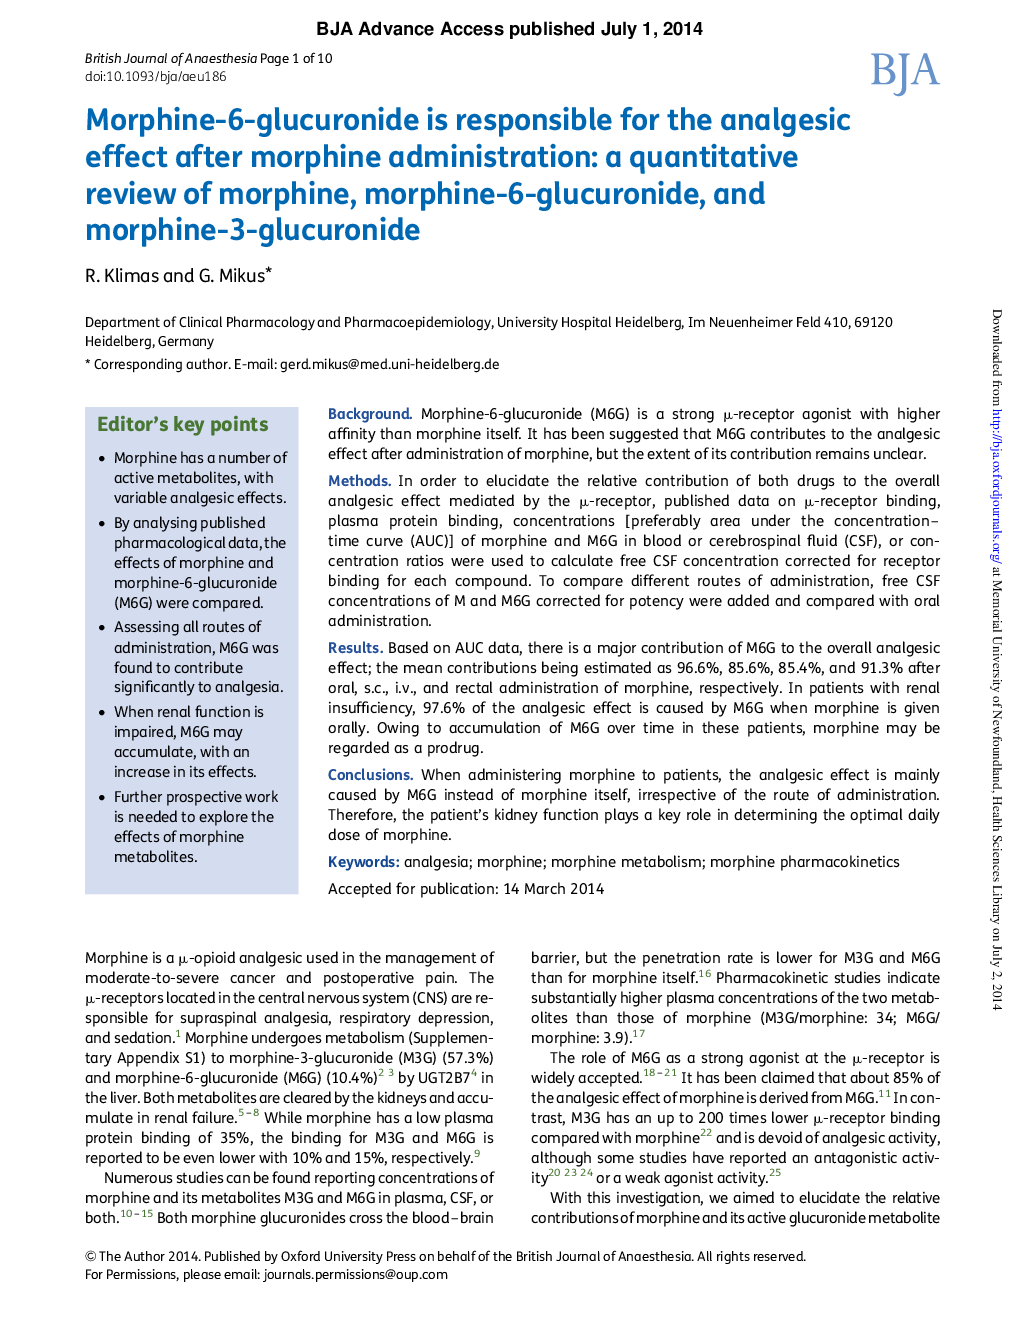 Morphine-6-glucuronide is responsible for the analgesic effect after morphine administration: a quantitative review of morphine, morphine-6-glucuronide, and morphine-3-glucuronide